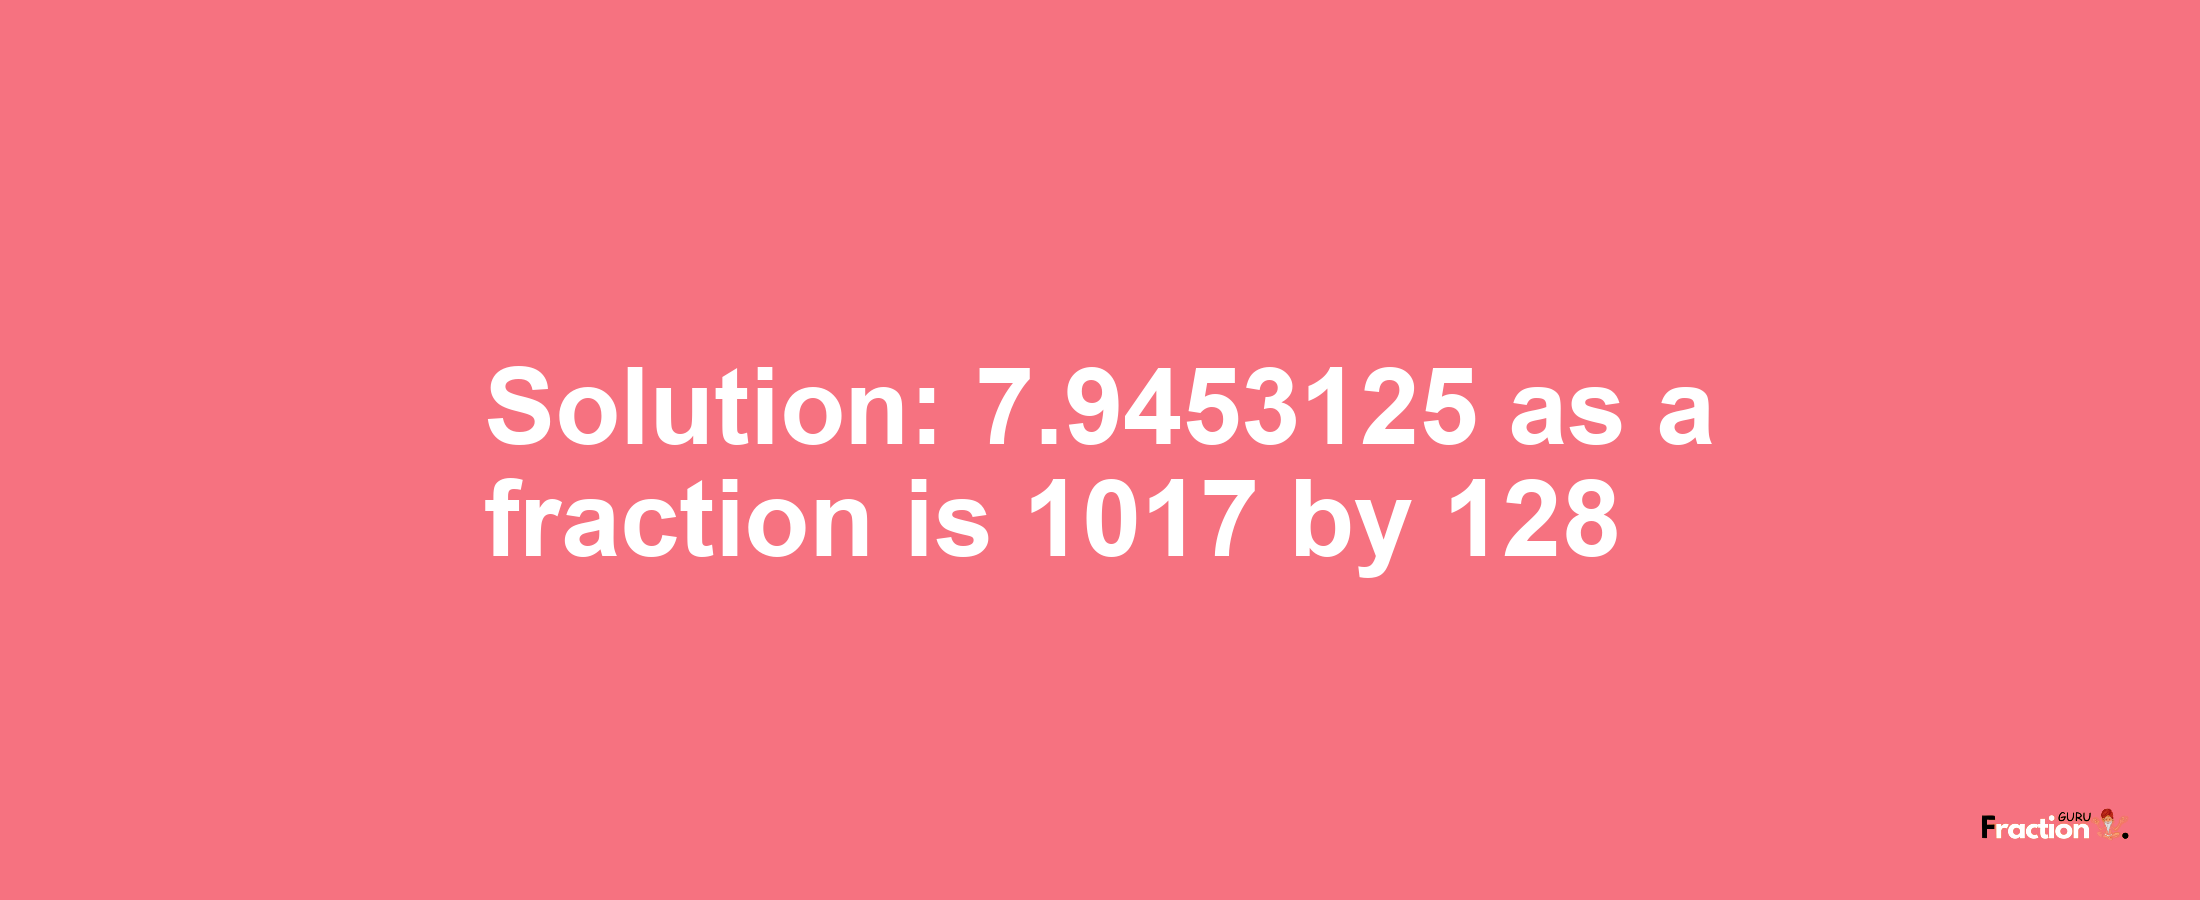 Solution:7.9453125 as a fraction is 1017/128